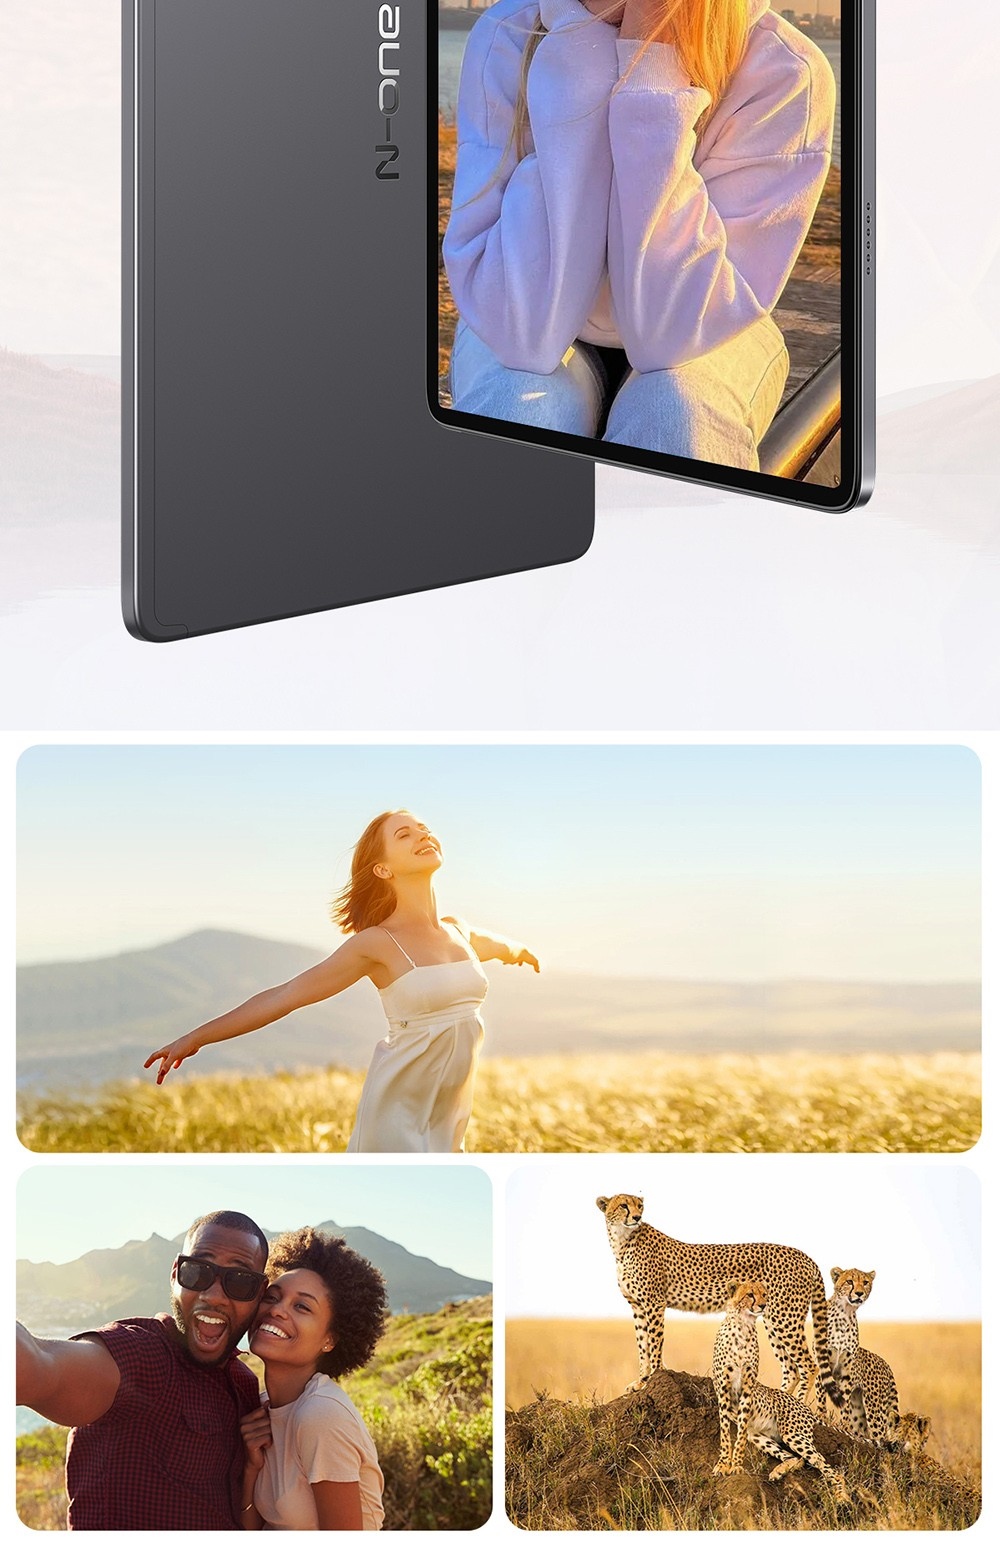 N-one NPad Q 10.1 Tablet met Lederen Hoes Octa-Core CPU, Android 13 OS, 6GB RAM 128GB ROM, 5G WiFi, BT5.0